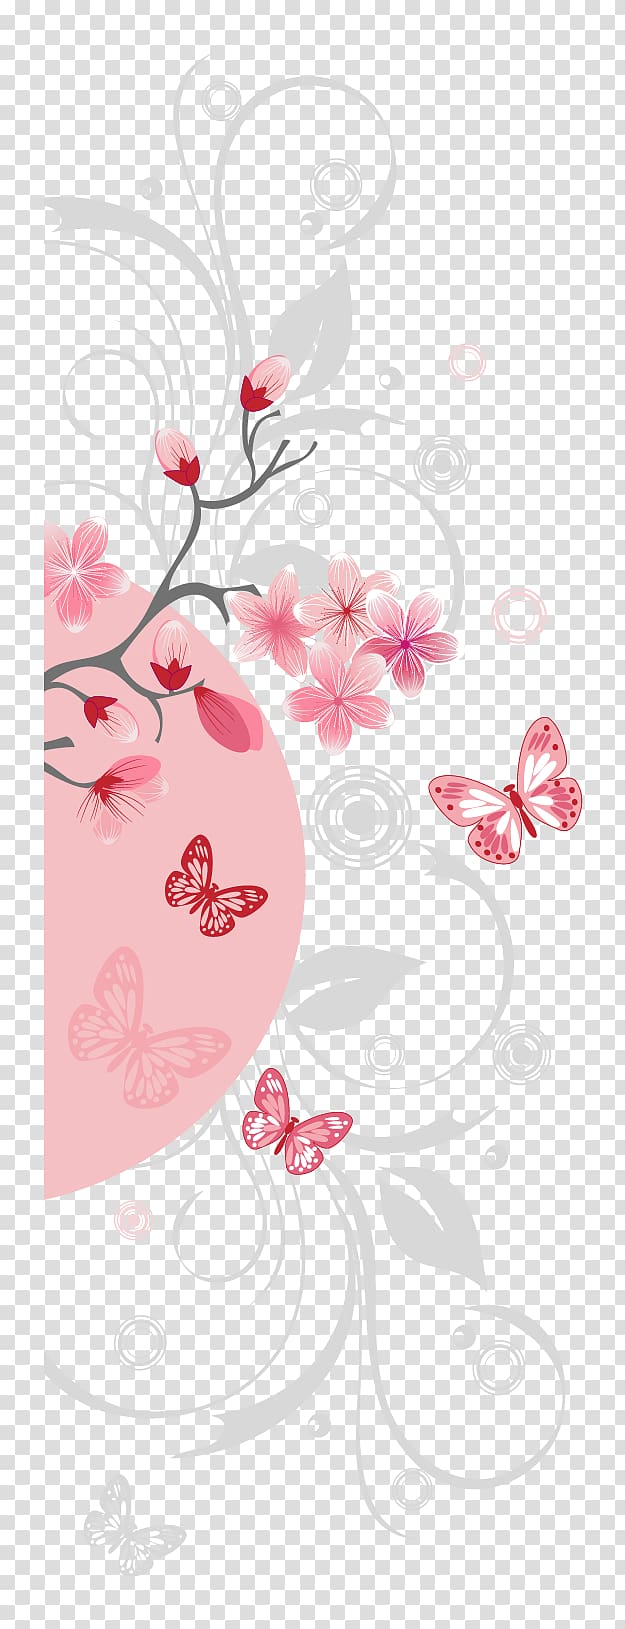 national,cherry,blossom,festival,japanese,blossoms,flowers,love,border,flower arranging,text,heart,branch,happy birthday vector images,flower,encapsulated postscript,petal,pink background,organ,peach,pink flower,visual arts,stock photography,rose family,red,plant,pink vector,pink ribbon,nature,cerasus,cherry blossom,cherry blossoms,cherry petals,cherry vector,flora,floral design,floristry,flowering plant,graphic design,japan,japanese vector,blossoms vector,national cherry blossom festival,pink,japanese cherry,png clipart,free png,transparent background,free clipart,clip art,free download,png,comhiclipart